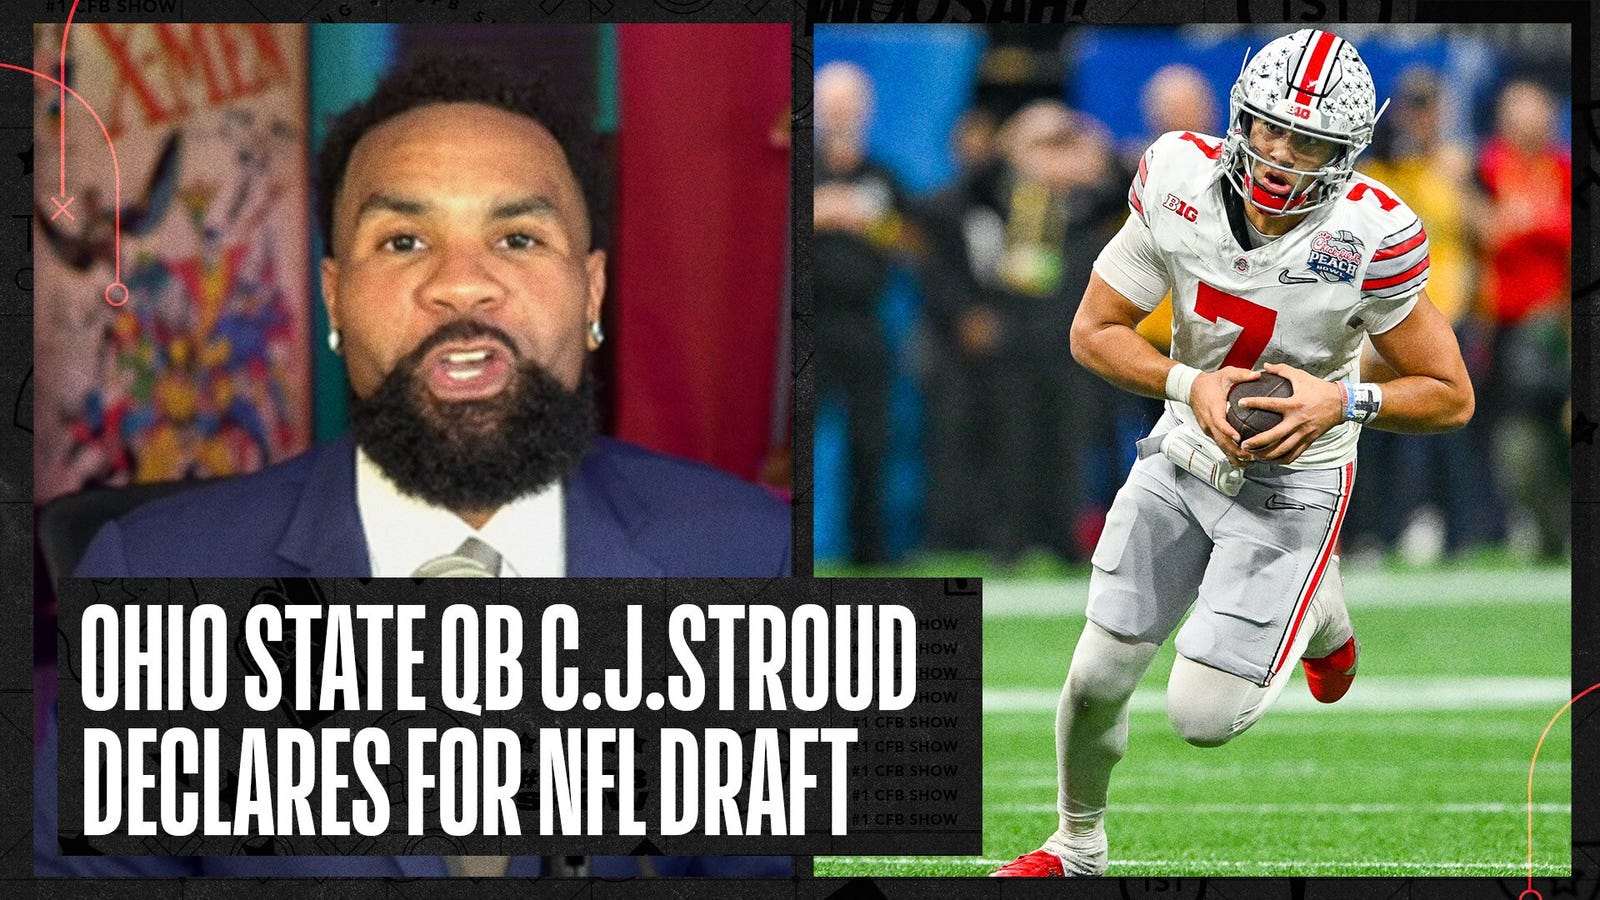 Ohio State's CJ Stroud declares for NFL Draft